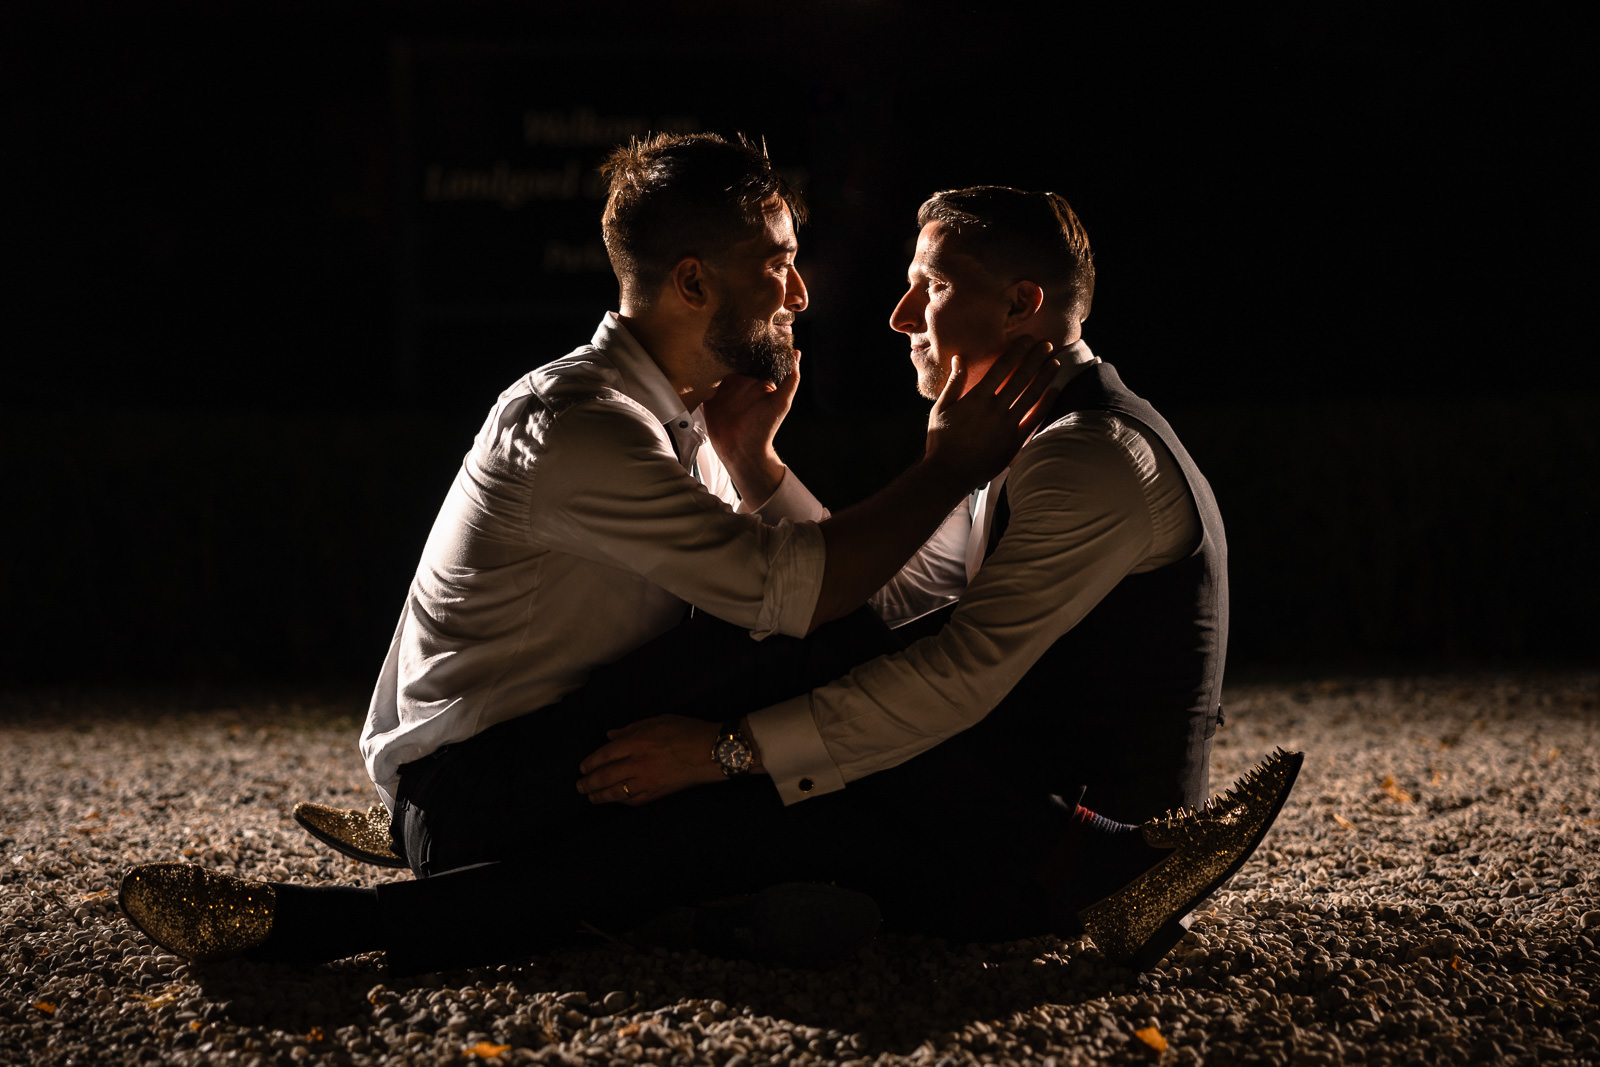 Two grooms during a creative night time shoot to finish of the same sex wedding day